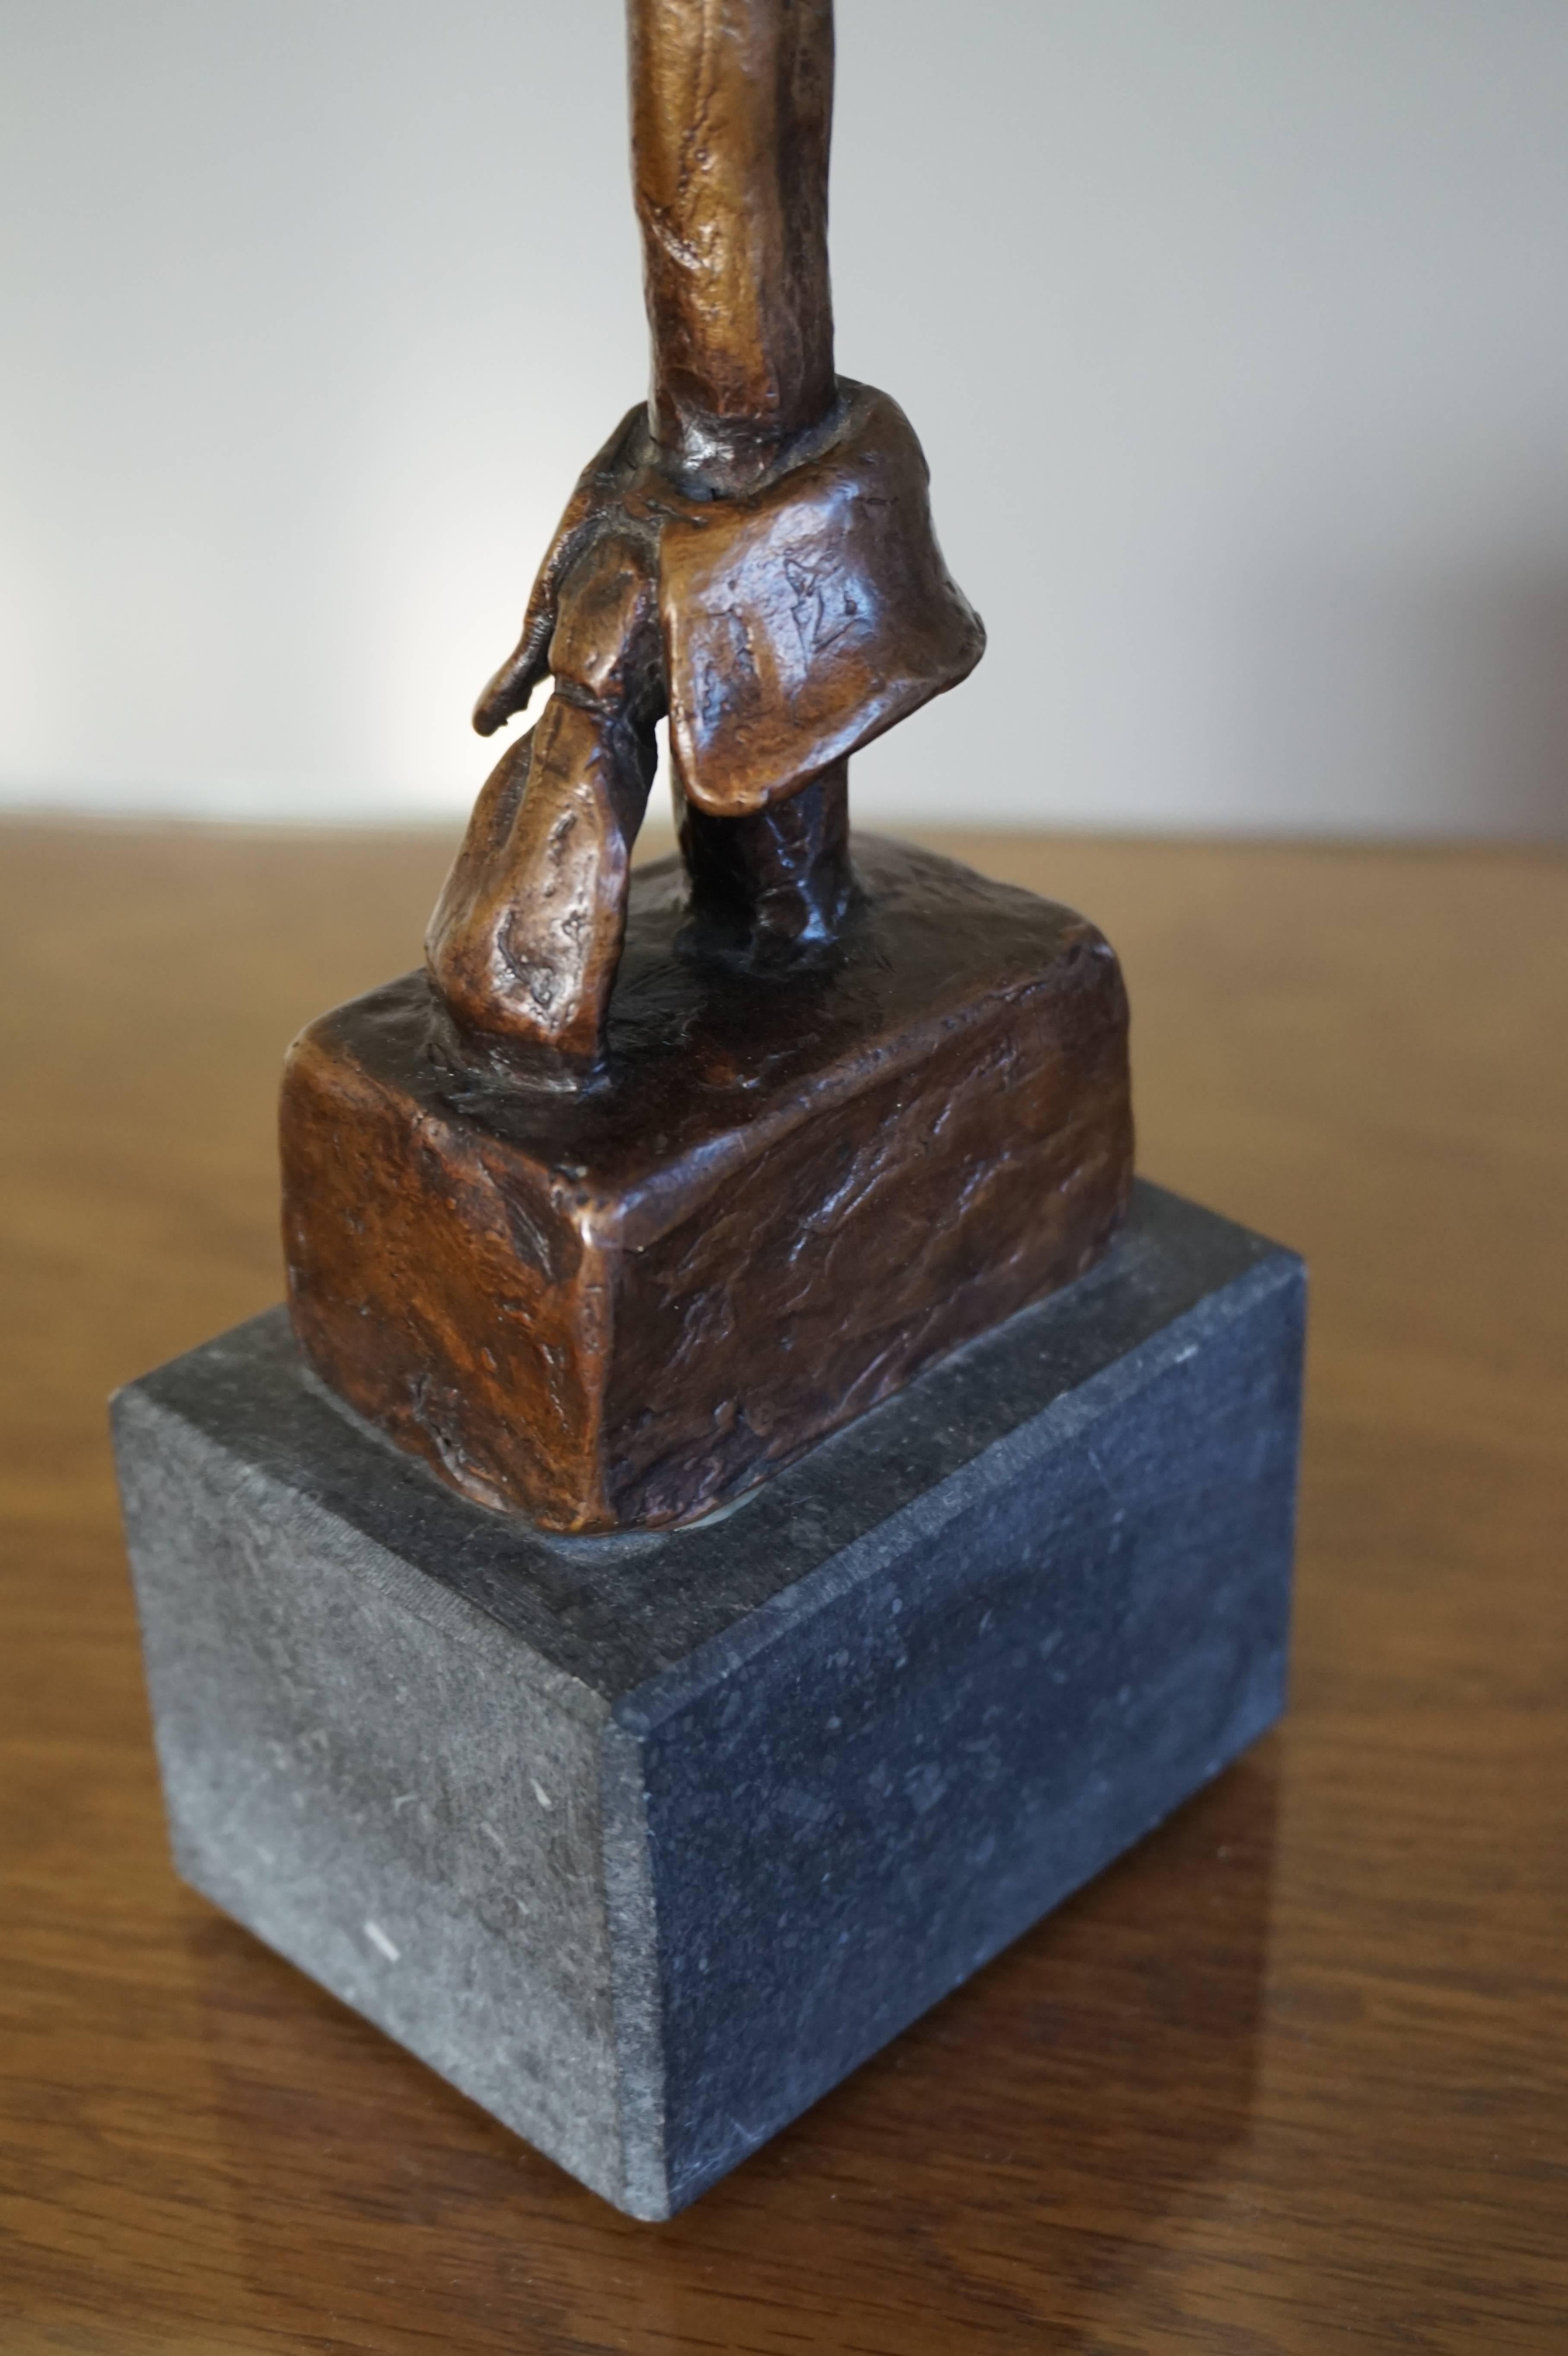 Artistic bronze for Fashionados, sharp dressed men and/or dandies.

If there is such a thing as a competition for the best dressed male then this artistically designed and handcrafted, modern bronze sculpture would make the perfect trophy for the